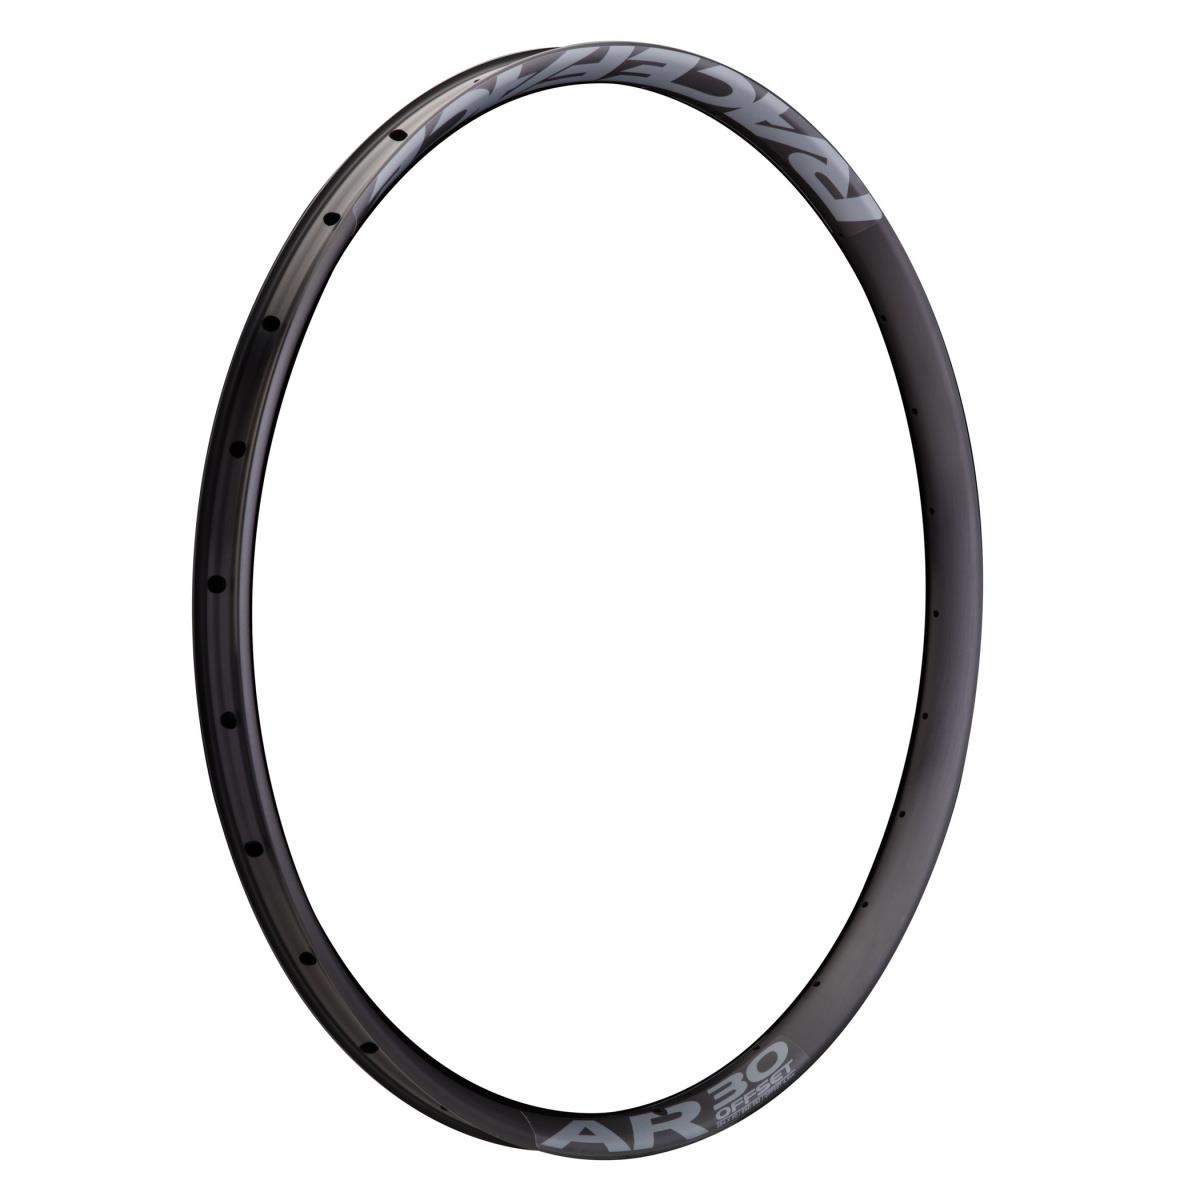 Race Face Jante MTB Ar Offset 30 Black/Grey, 27.5 Inches x 30 mm